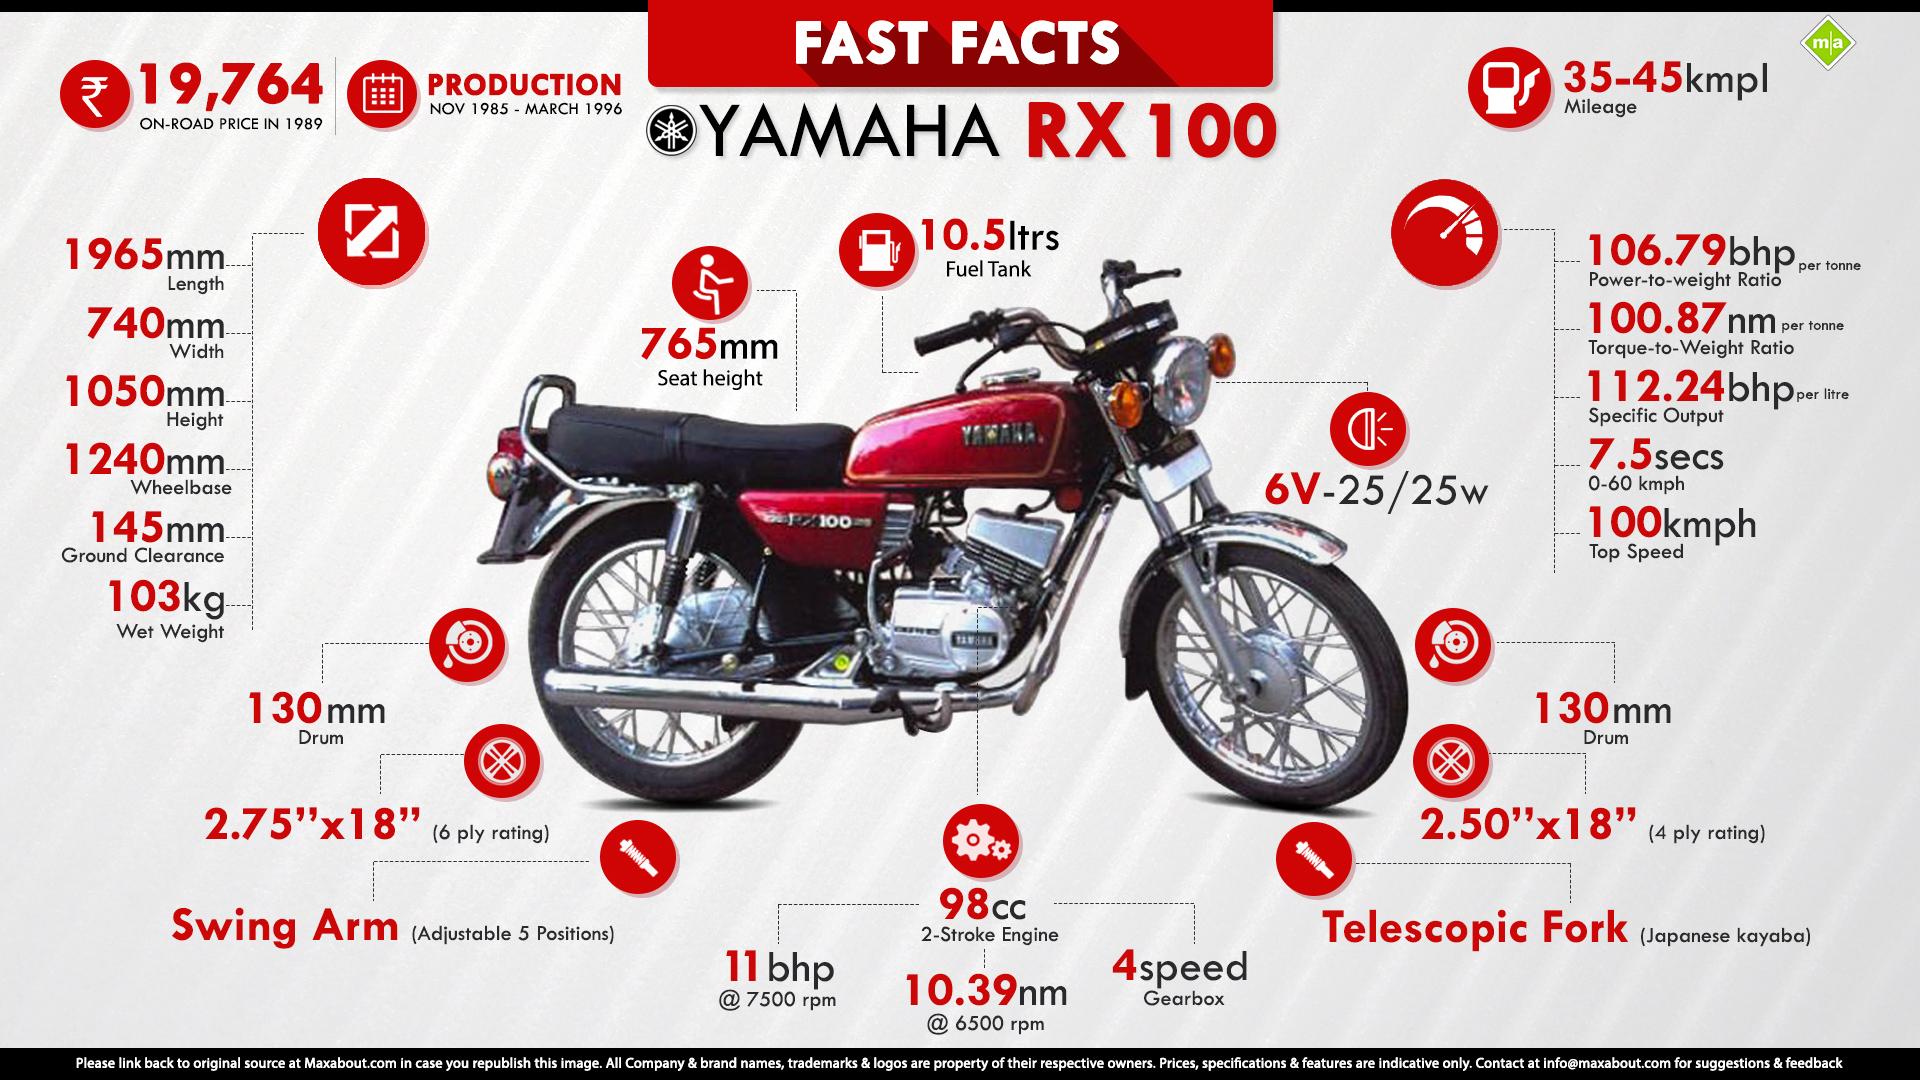 Fast Facts The Legendary Yamaha Rx 100